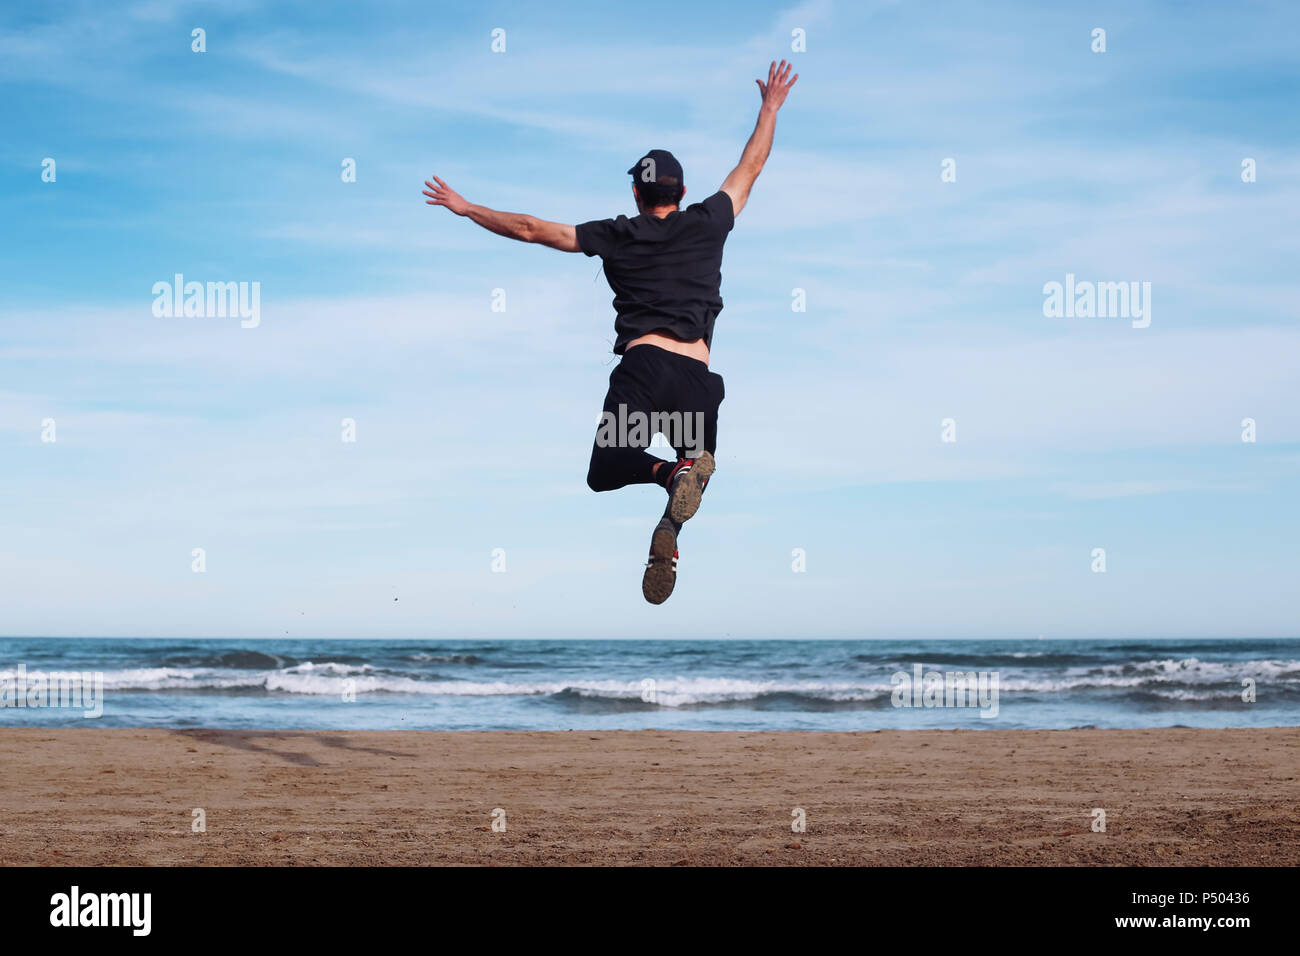 Back view of man jumping in the air on the beach Stock Photo